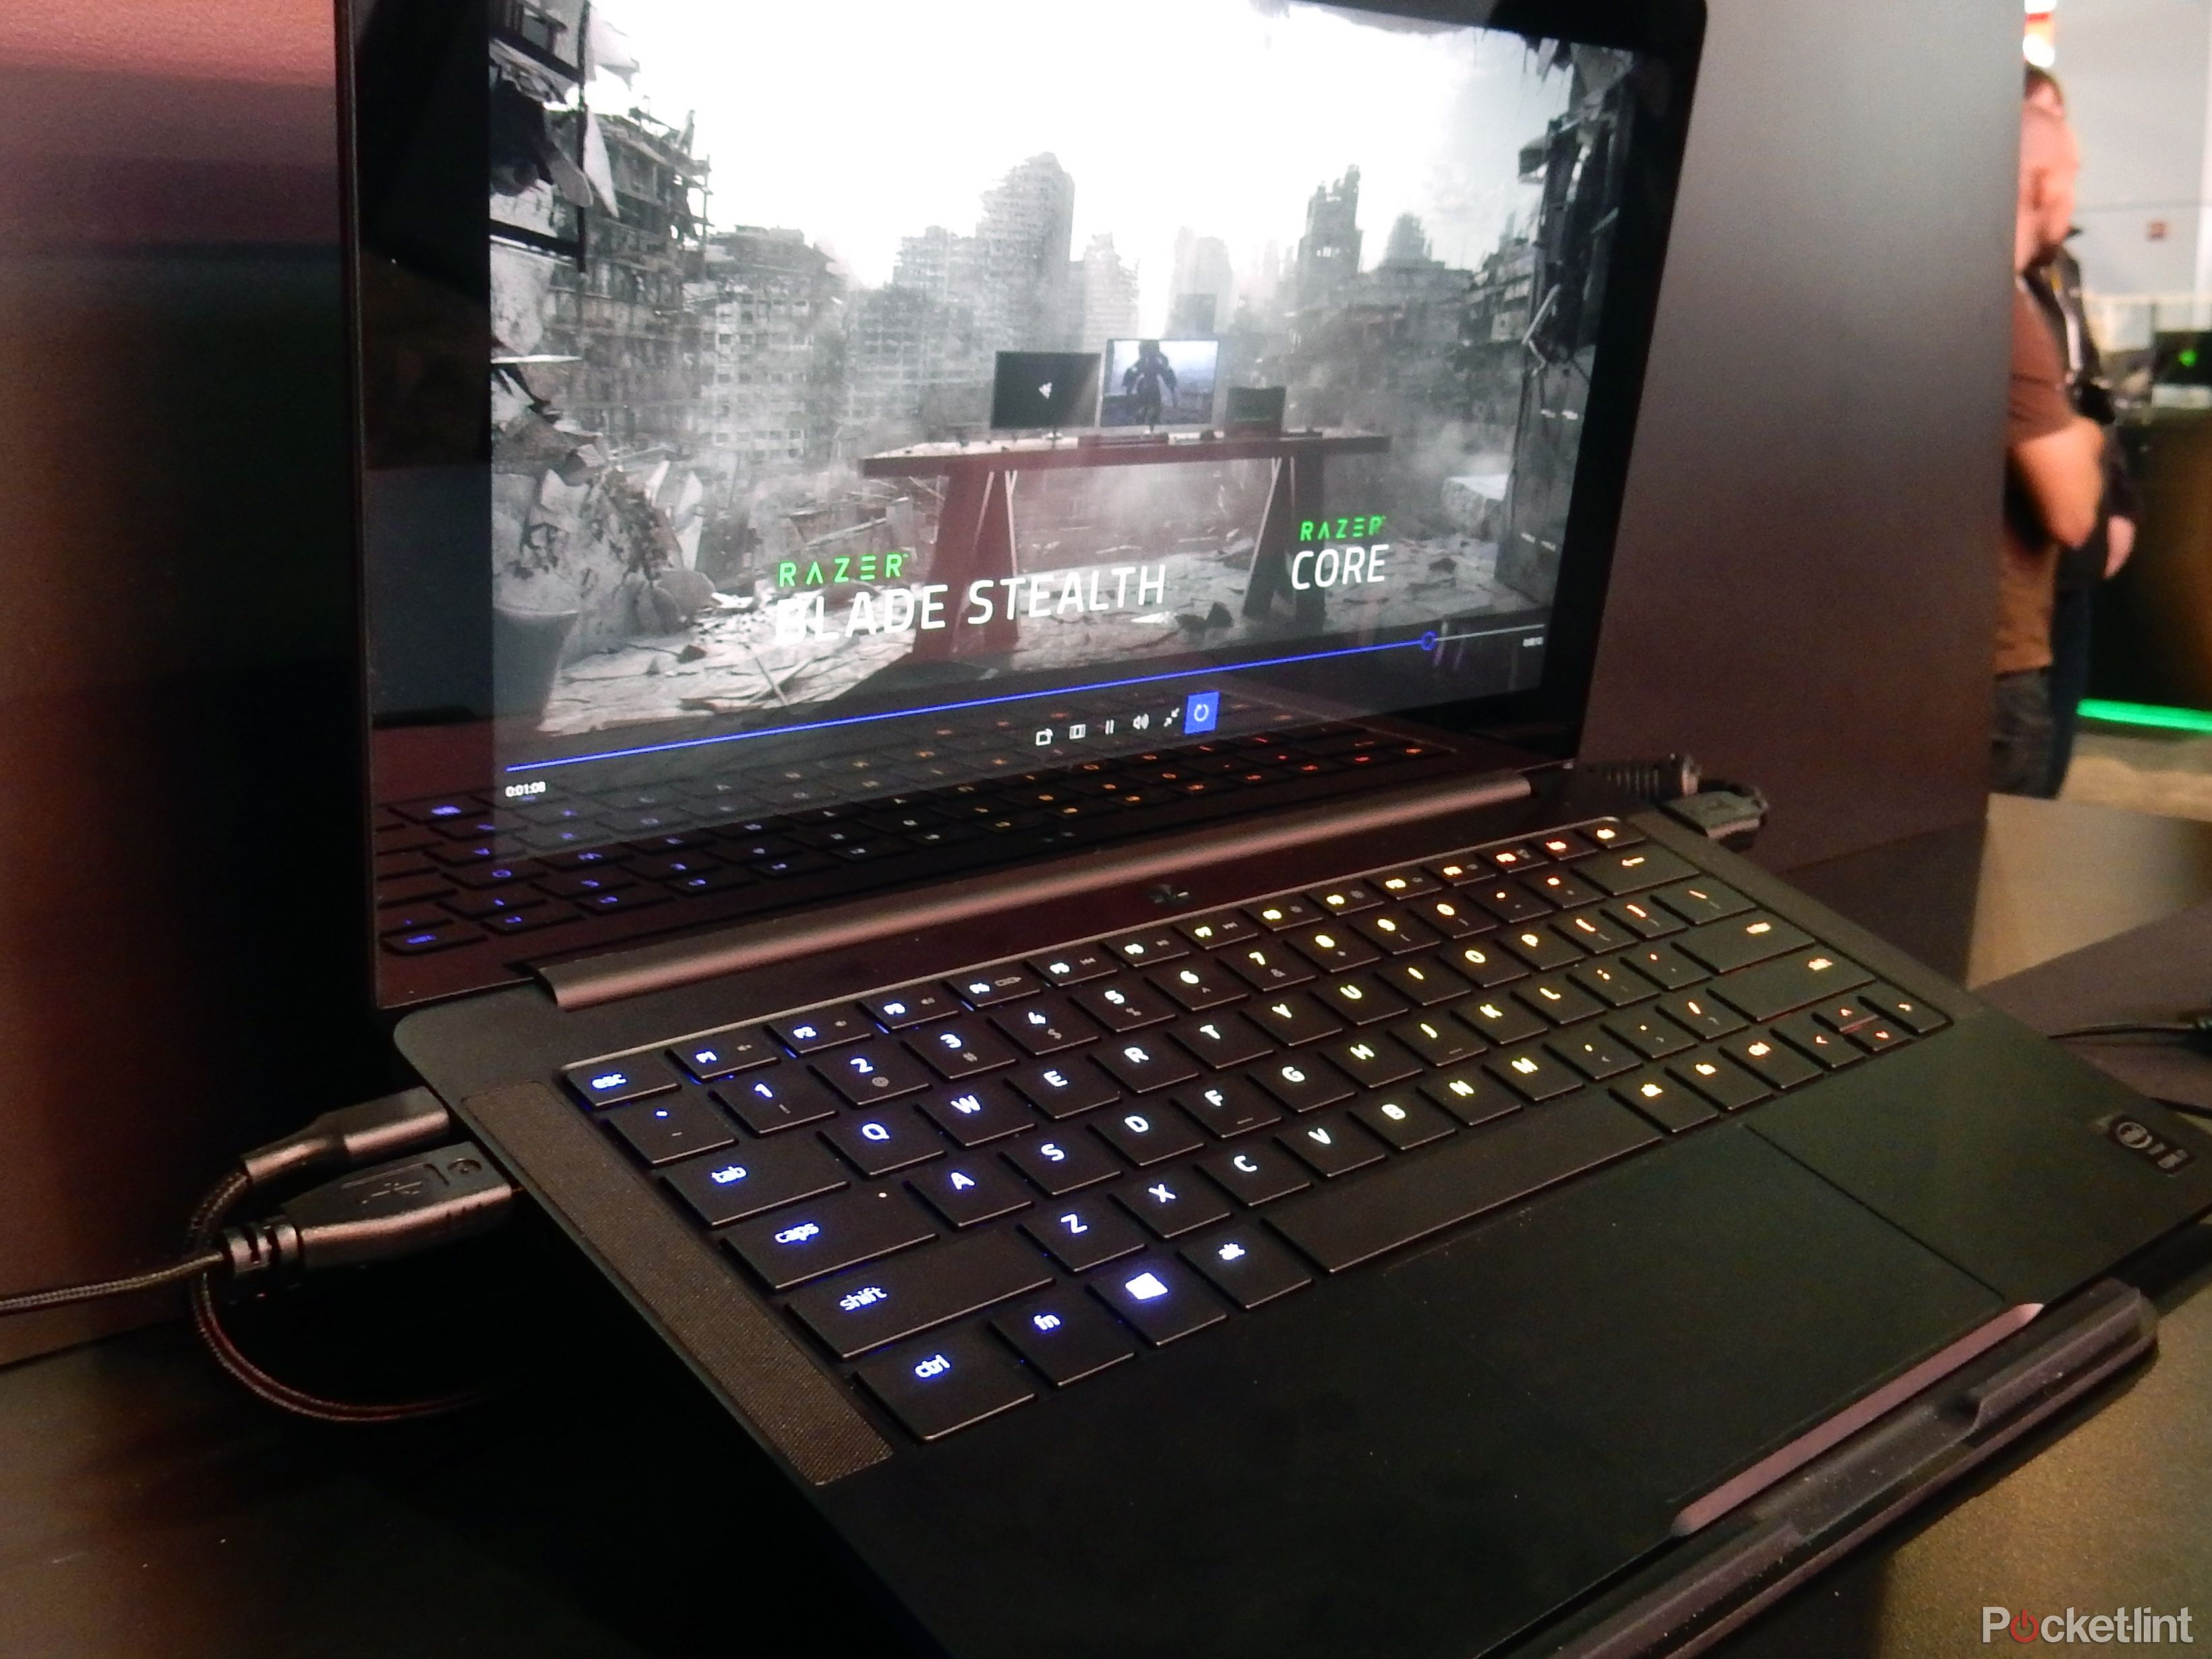 razer enters ultrabook territory with this new beaut image 1